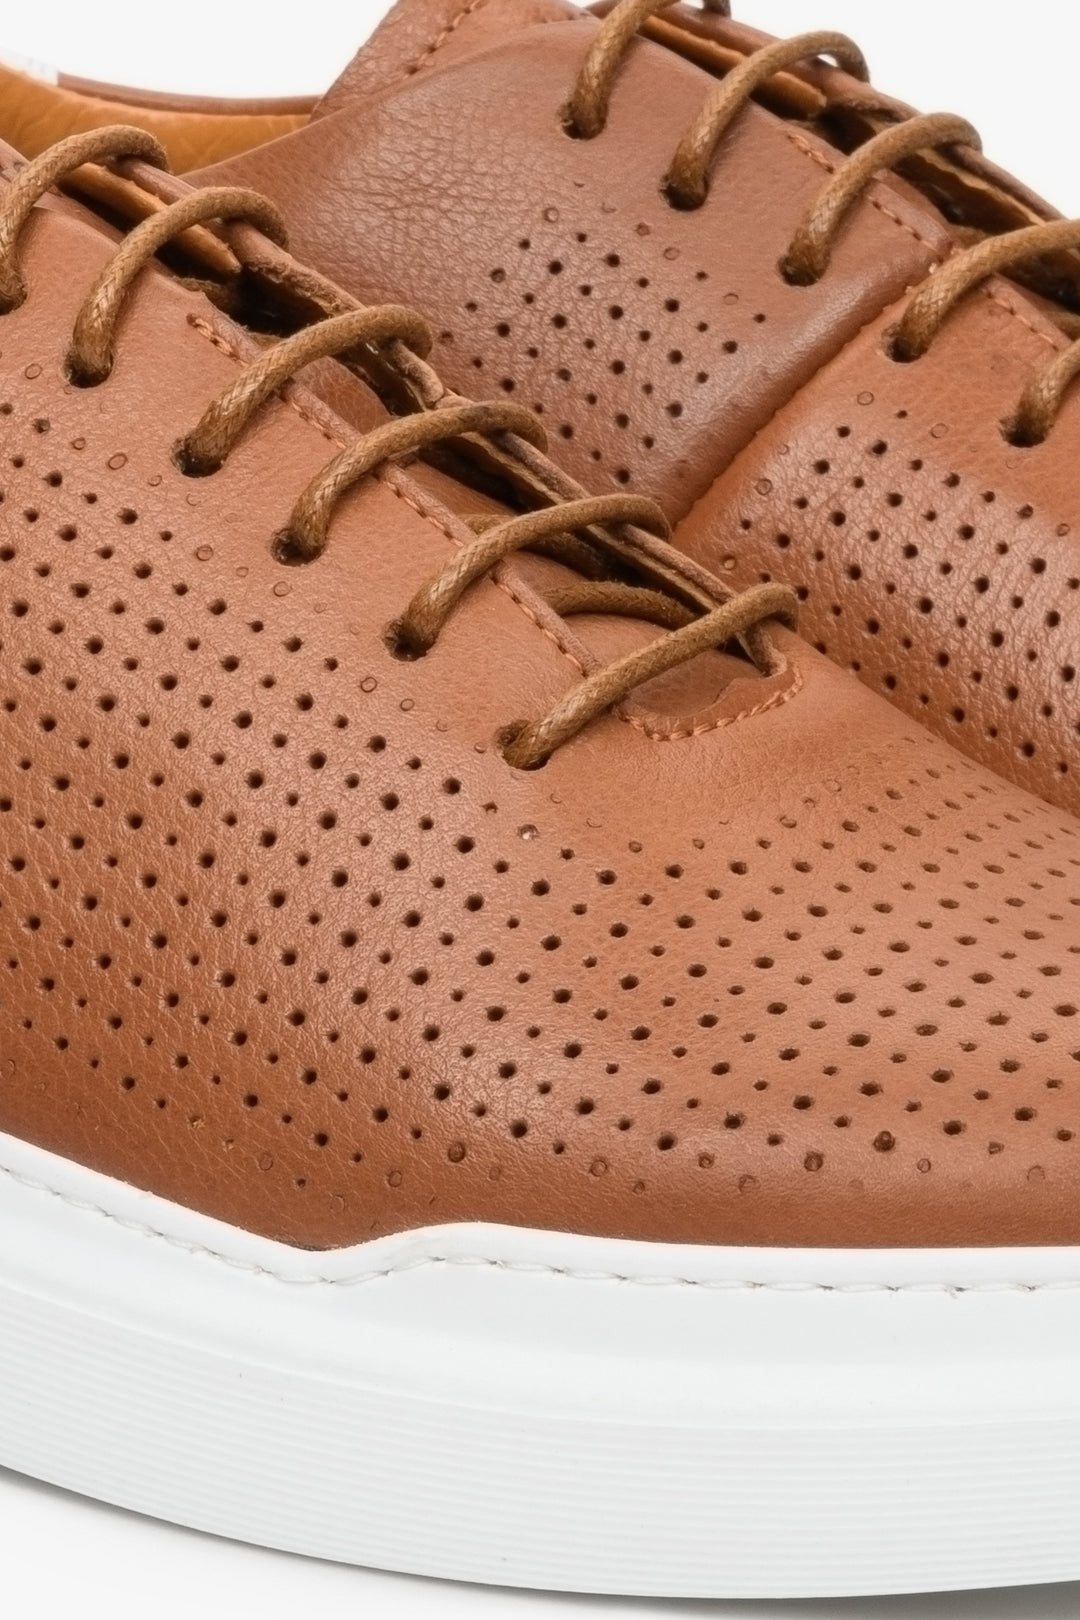 Men's leather perforated summer sneakers in natural leather - close-up on details.